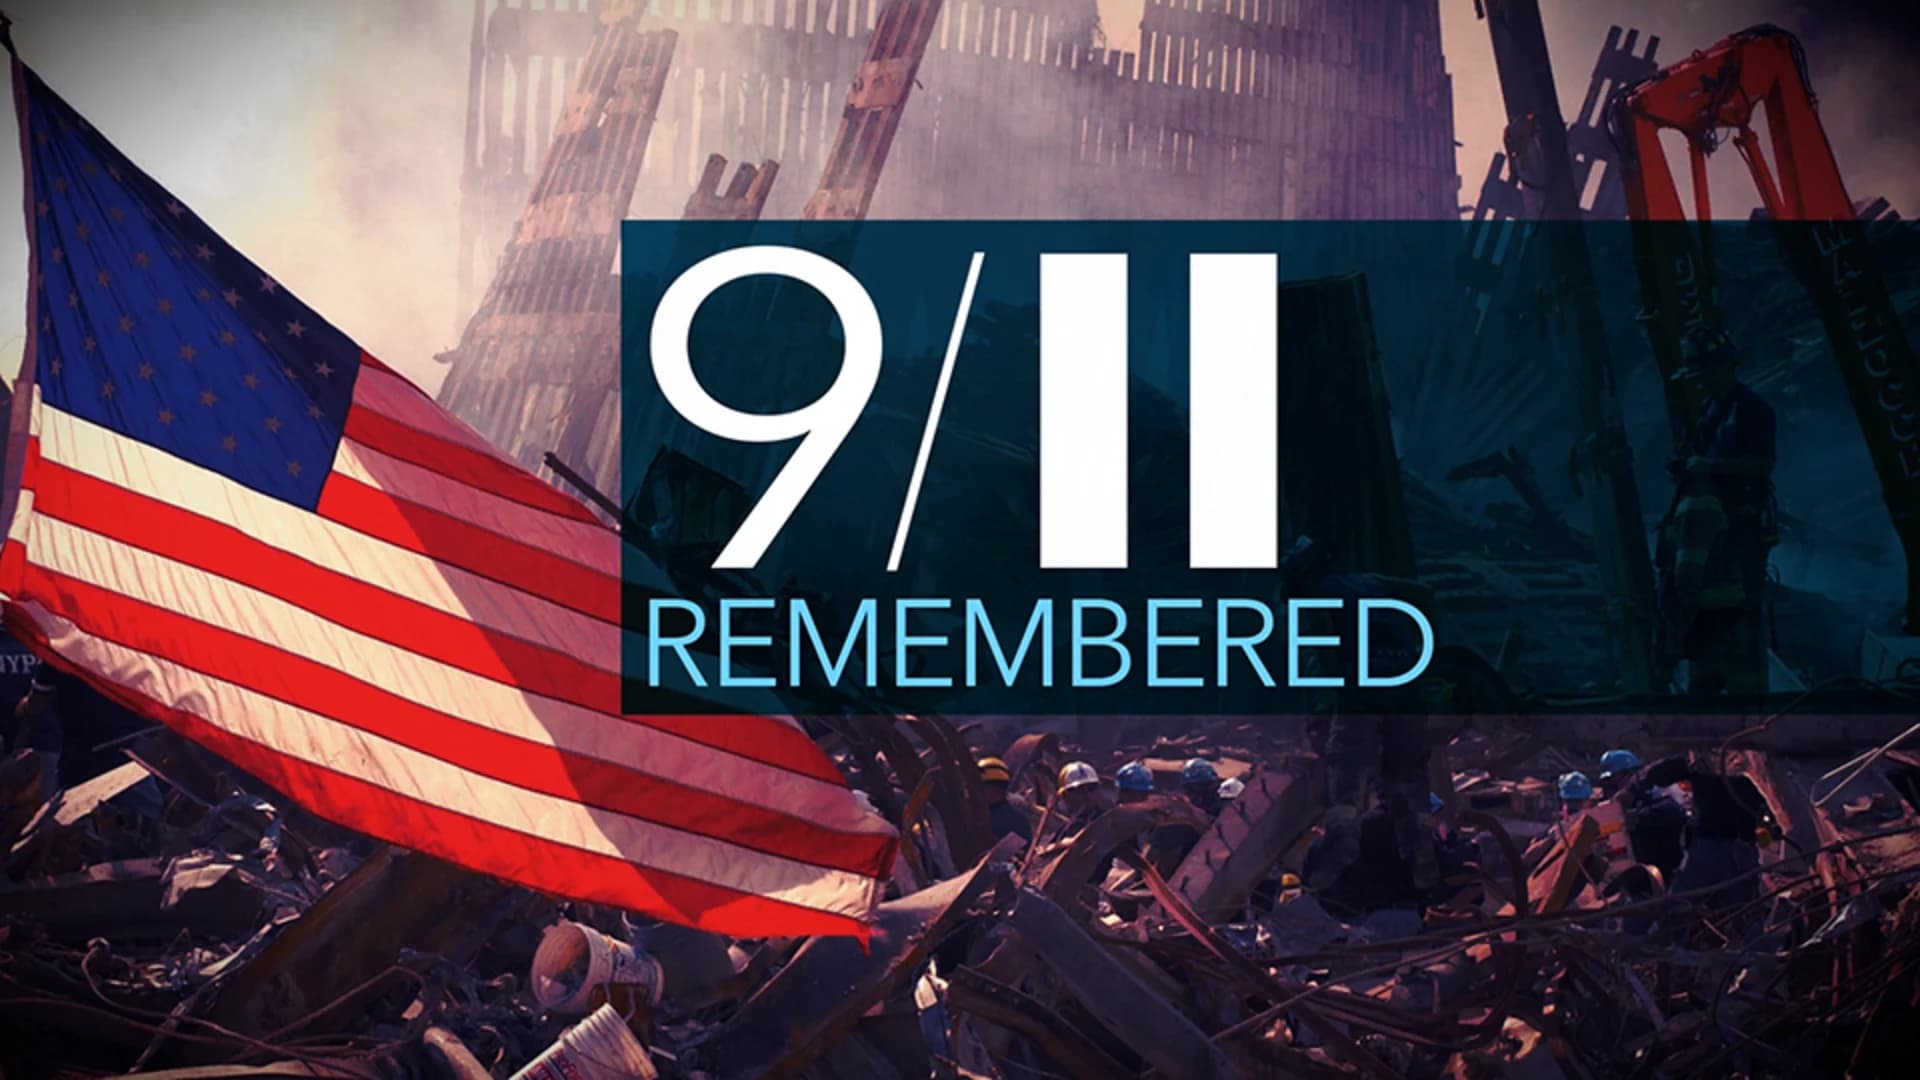 WATCH: Live video of the Sept. 11 Remembrance Ceremony